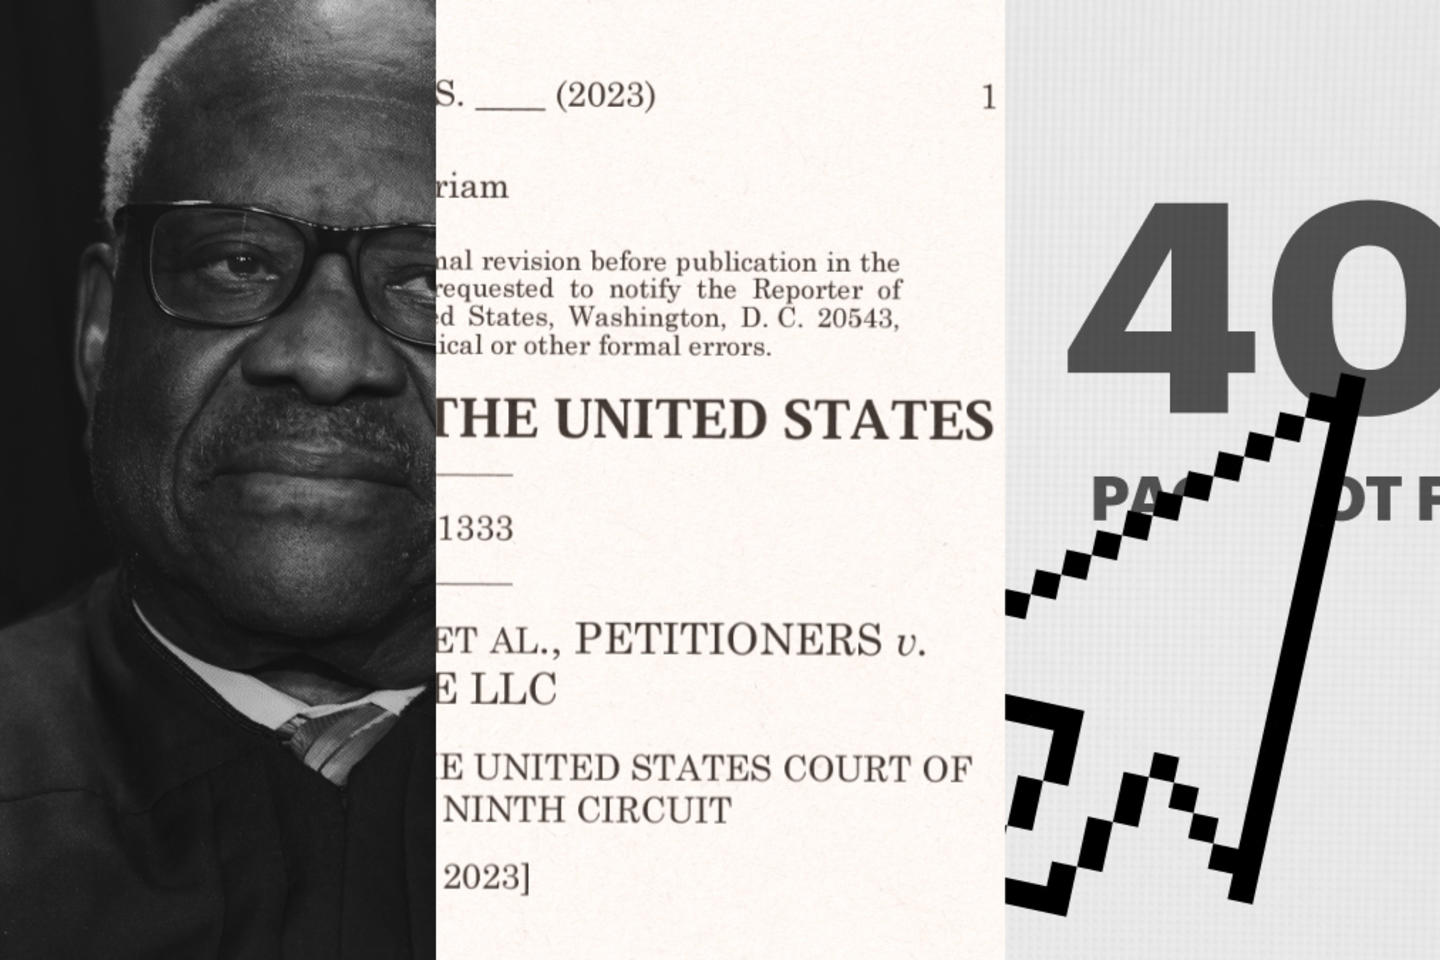 A picture split into thirds, with one piece showing Supreme Court Justice Clarence Thomas, another showing a court case, and the third showing a 404 webpage